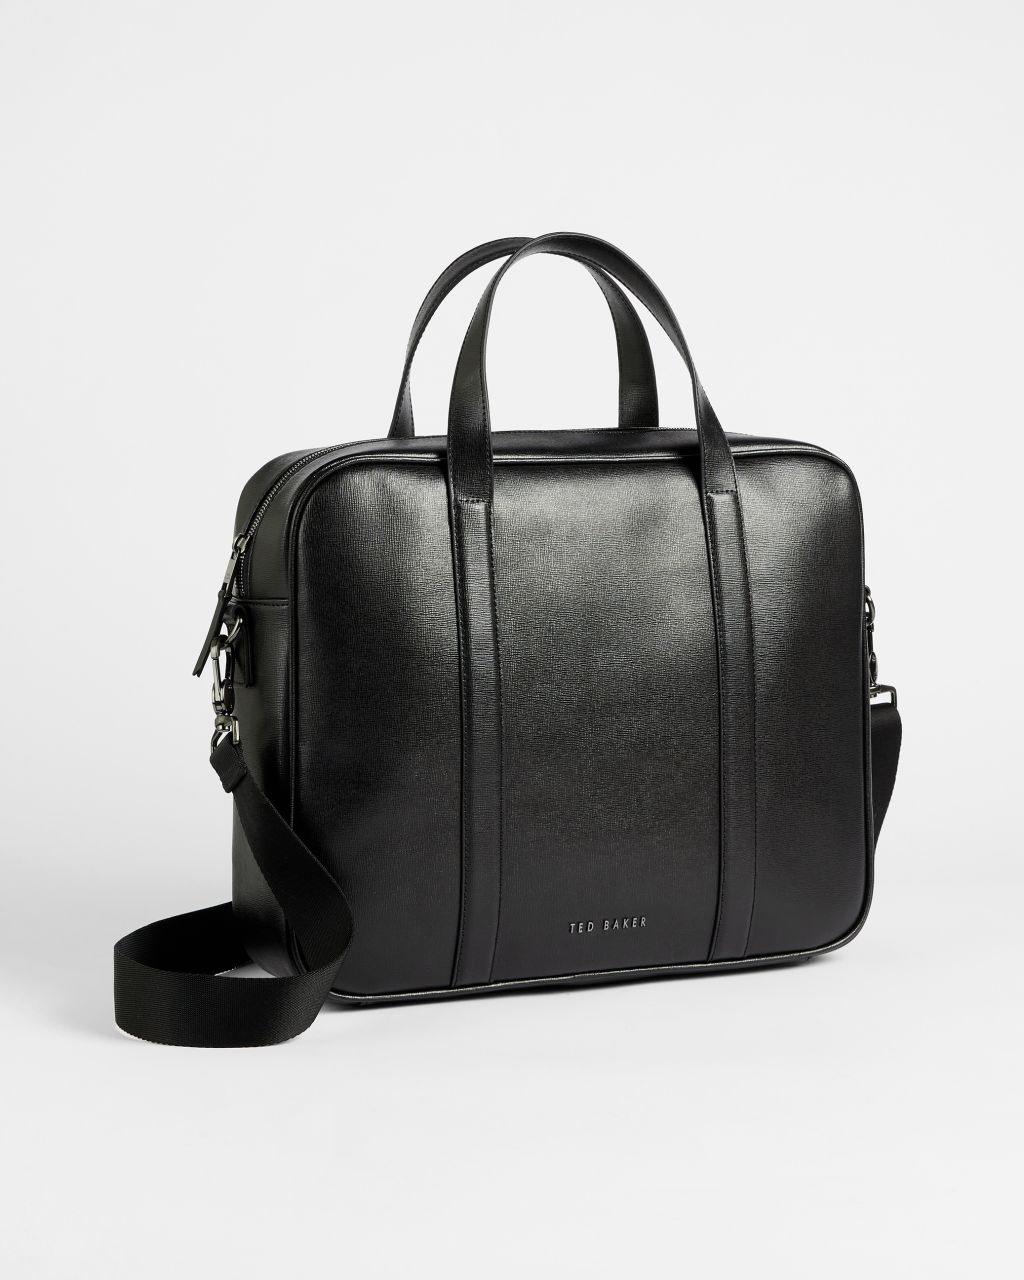 Ted Baker Men's Saffiano Leather Document Bag in Black, Strath